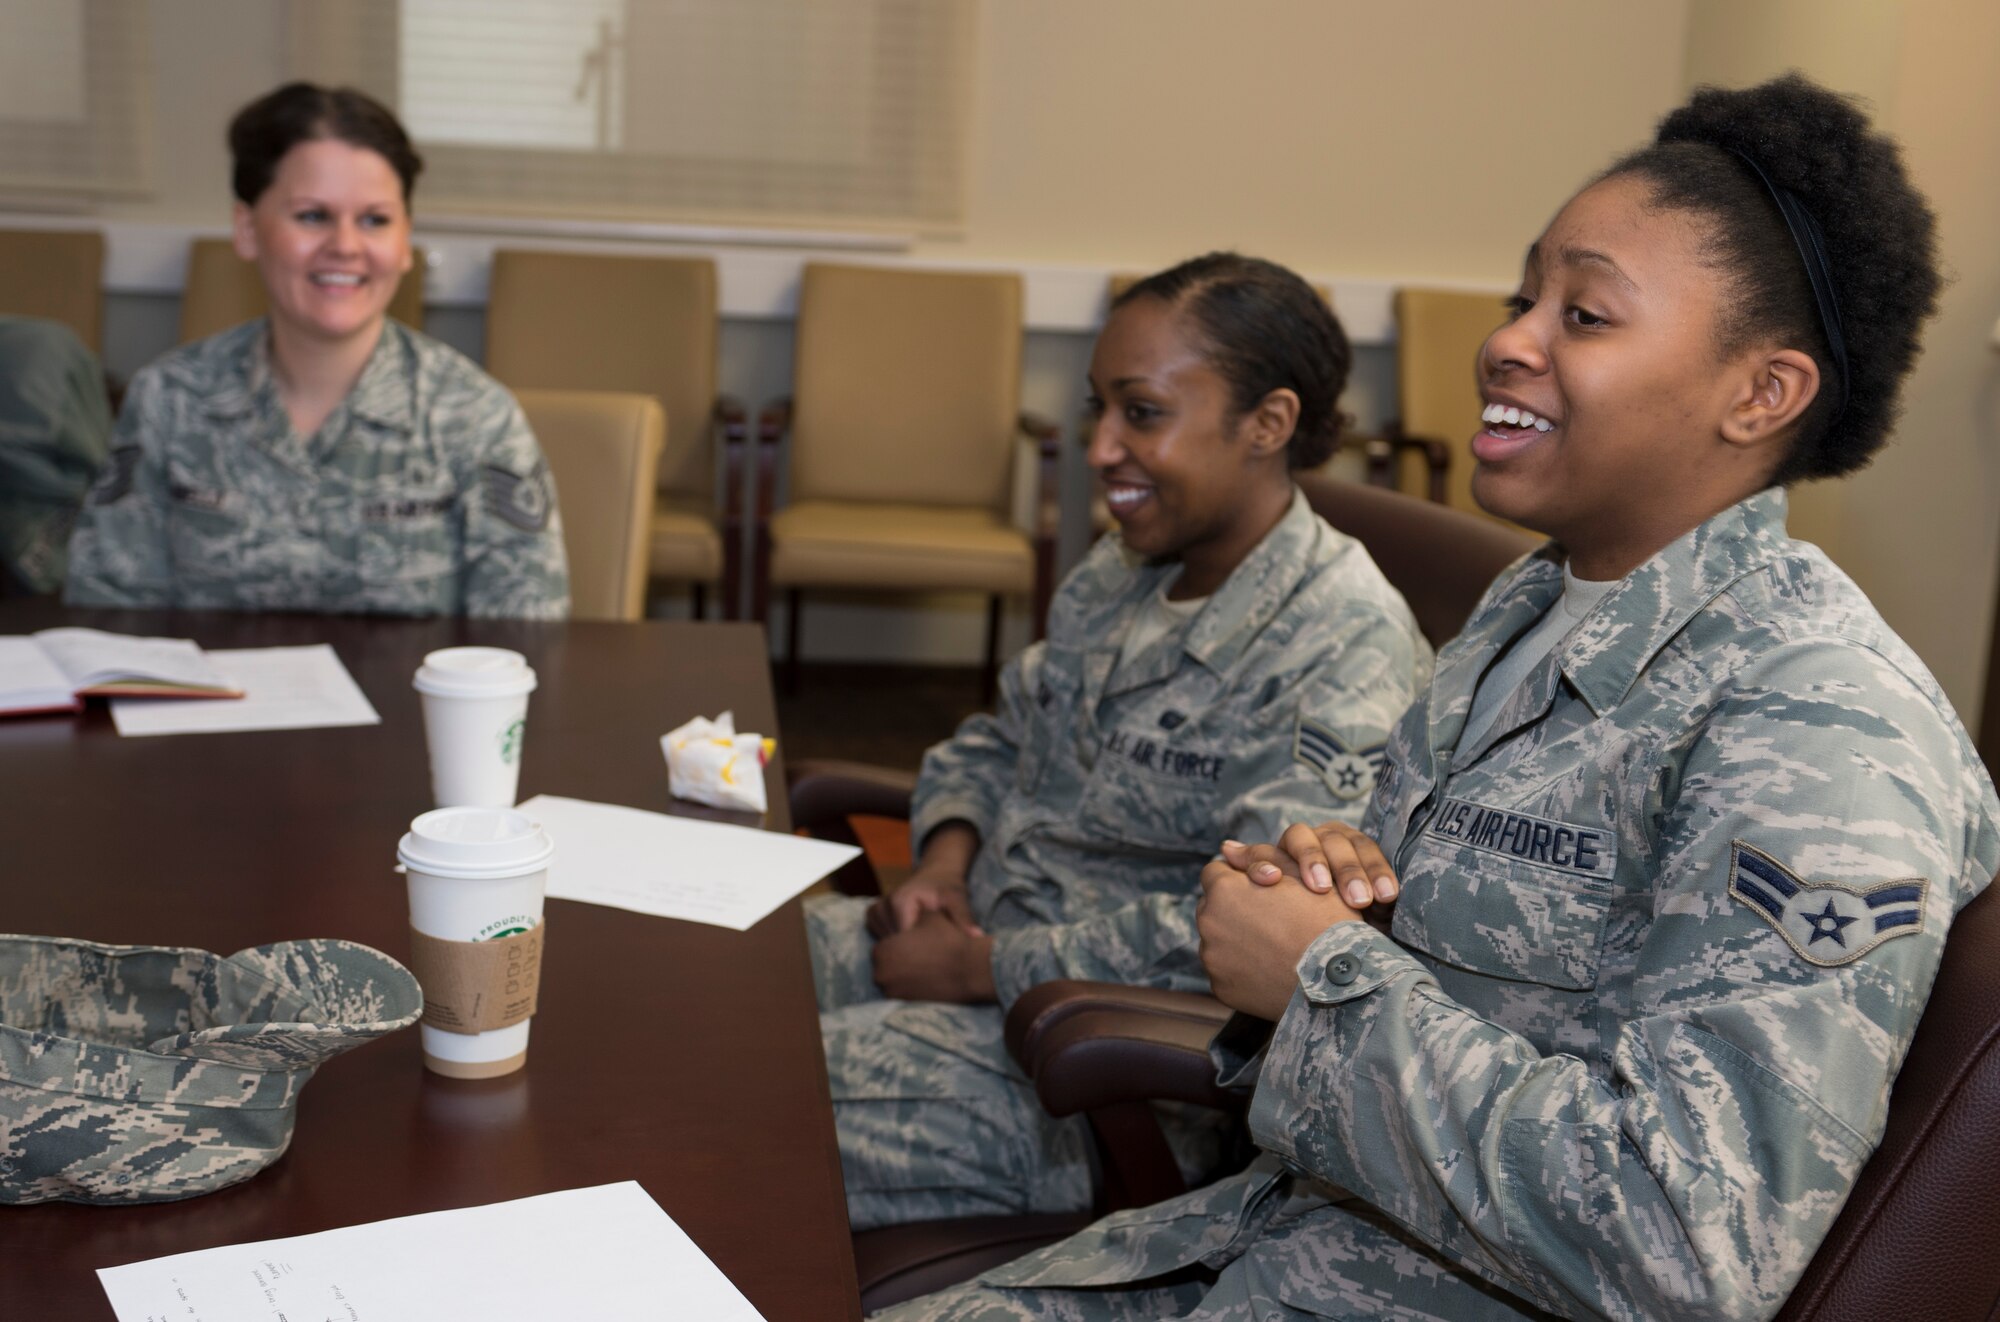 SPANGDAHLEM AIR BASE, Germany – Airman 1st Class Dominique Gilbreath, 52nd Medical Support Squadron outpatient records technician, shares with the SpangDamen women’s success forum what she enjoyed about the dorm dinner they held at the Spangdahlem conference room, March 7, 2013. Spangdamen hosted a make your own pizza night in which Airmen and senior NCOs discussed various topics ranging from professional to personal. (U.S. Air Force photo by Senior Airman Natasha Stannard/Released)